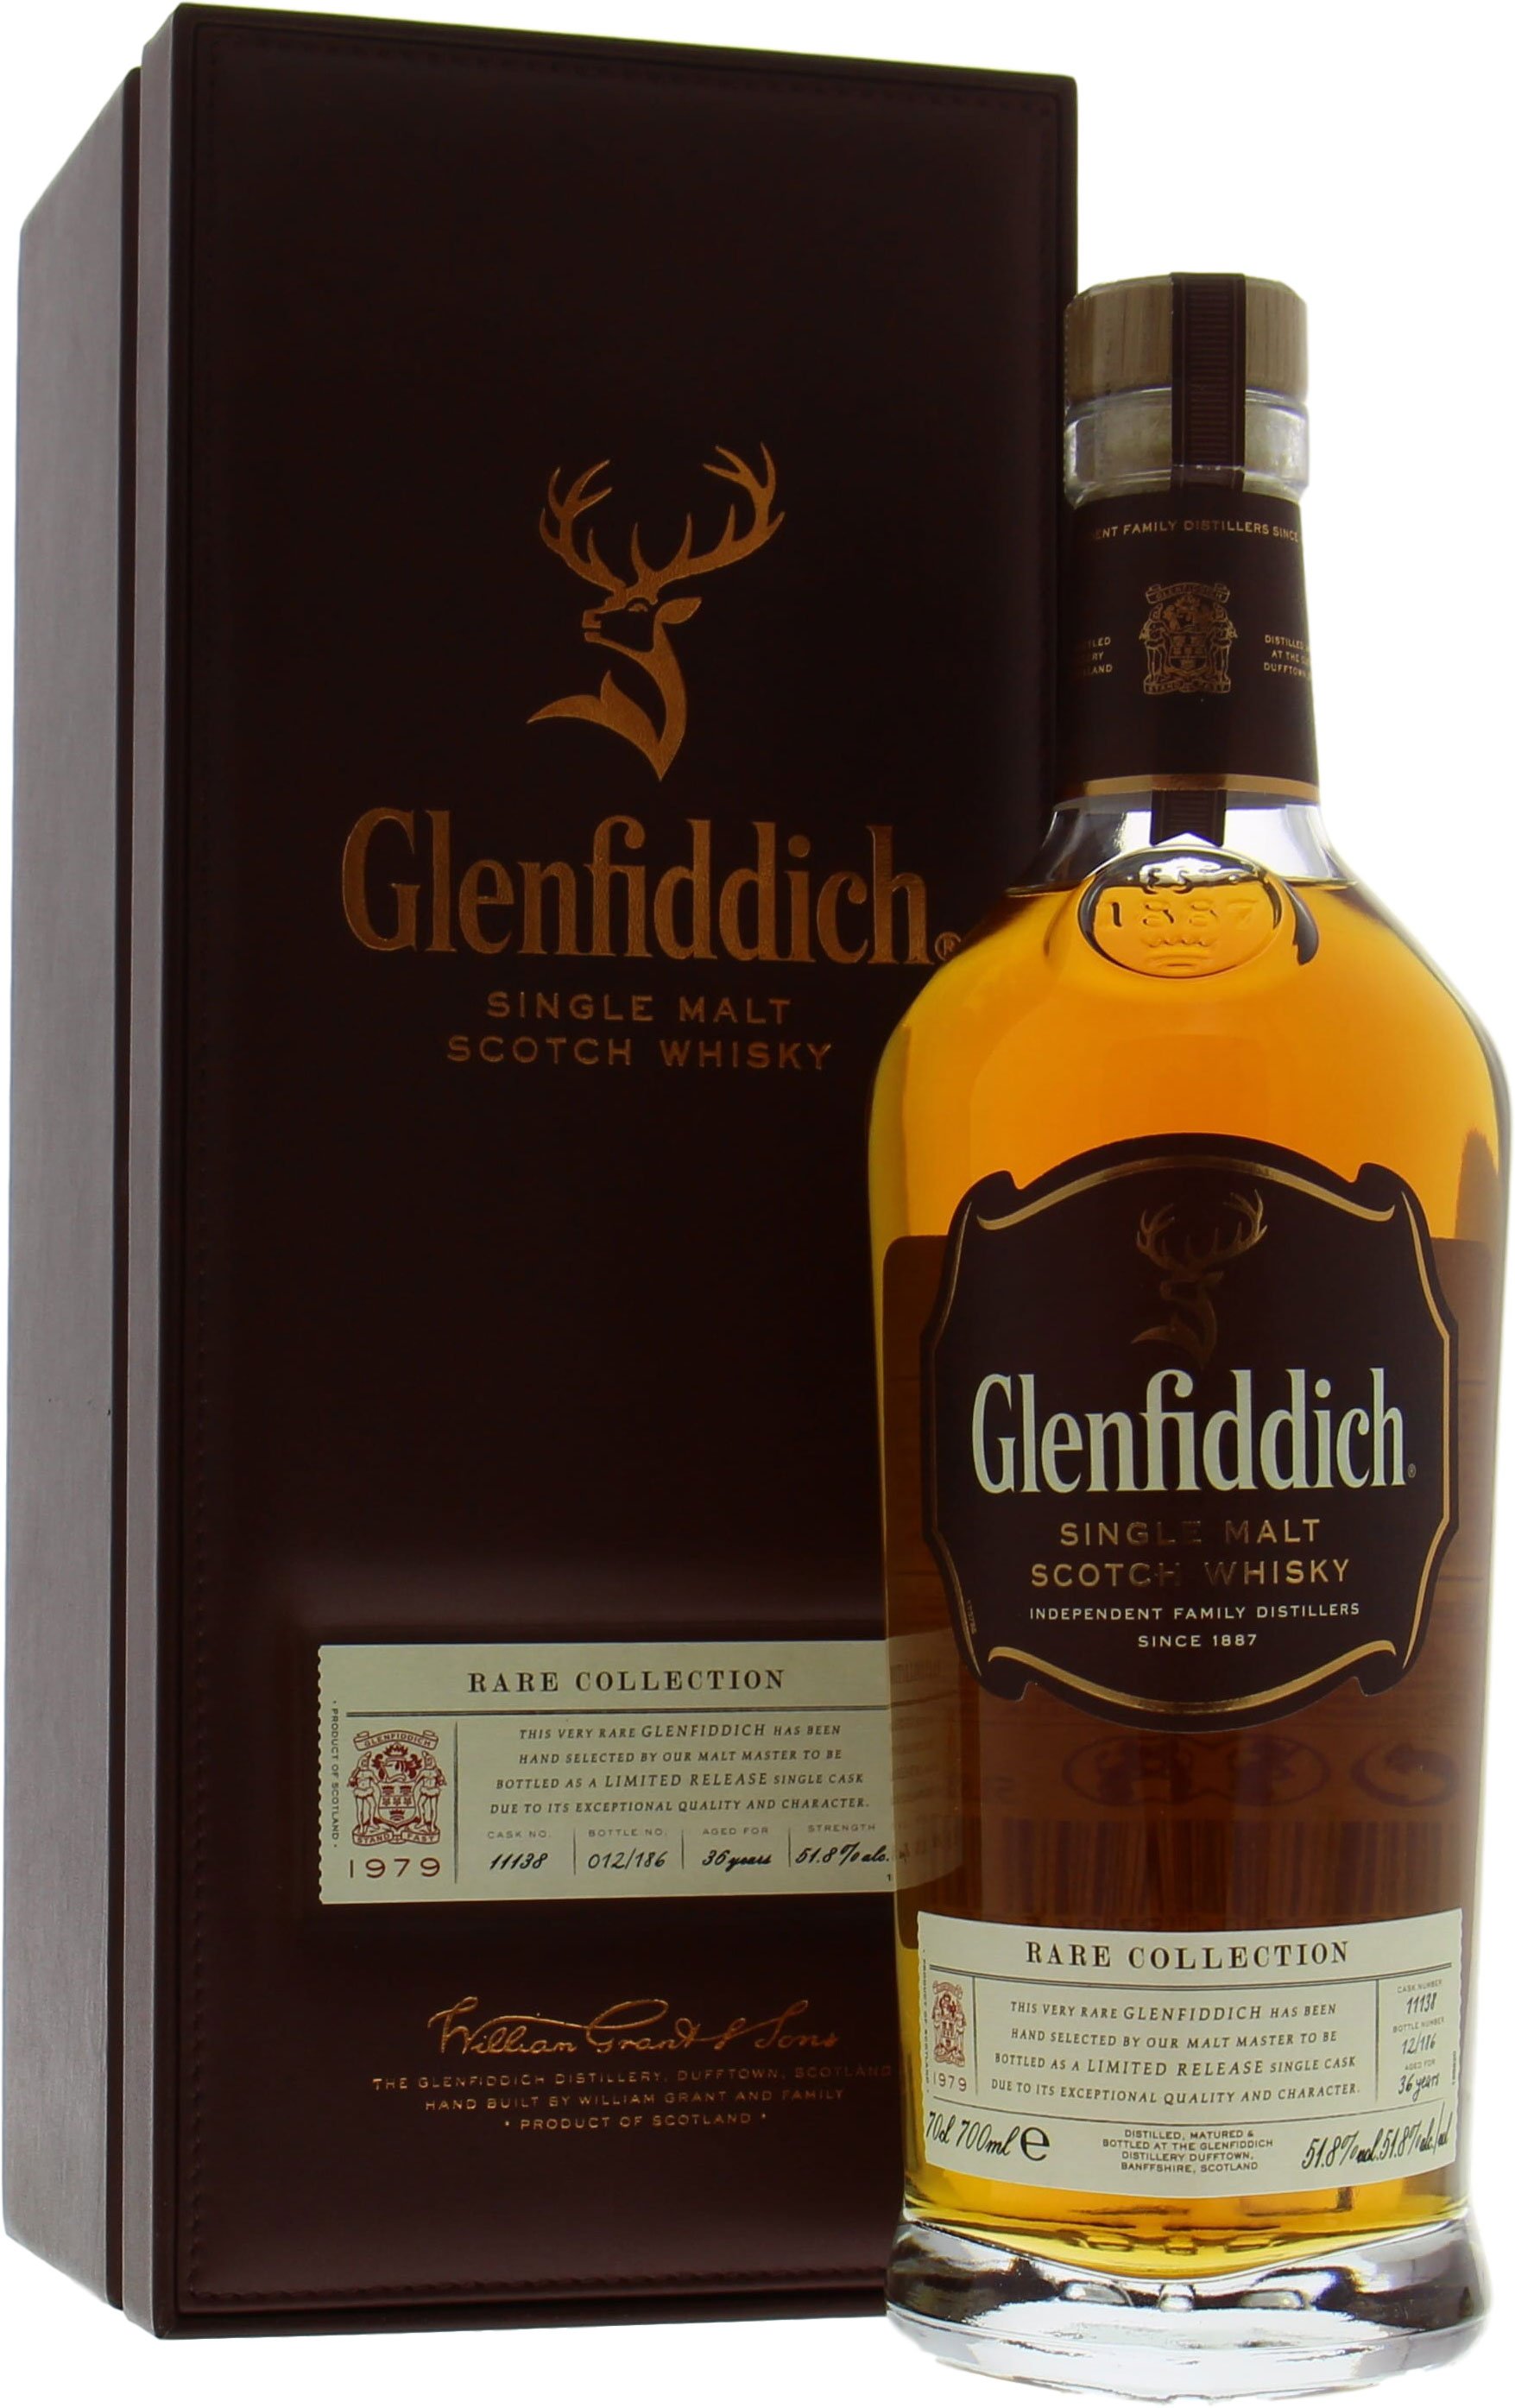 Glenfiddich - Rare Collection 36 Years Old Cask 11138 51.8% 1979